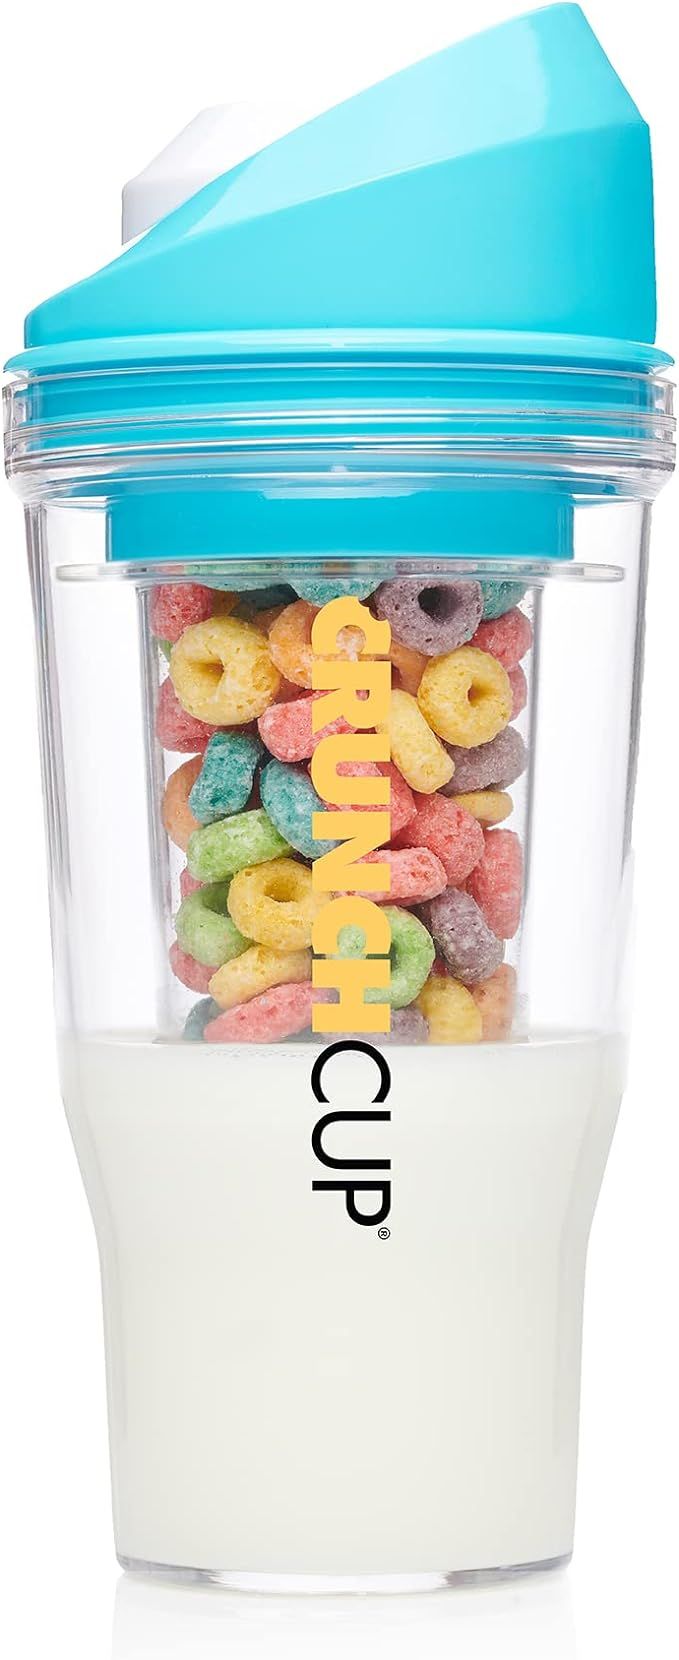 Amazon.com: CRUNCHCUP A Portable Cereal Cup - No Spoon. No Bowl. It's Cereal On The Go, XL Blue: ... | Amazon (US)